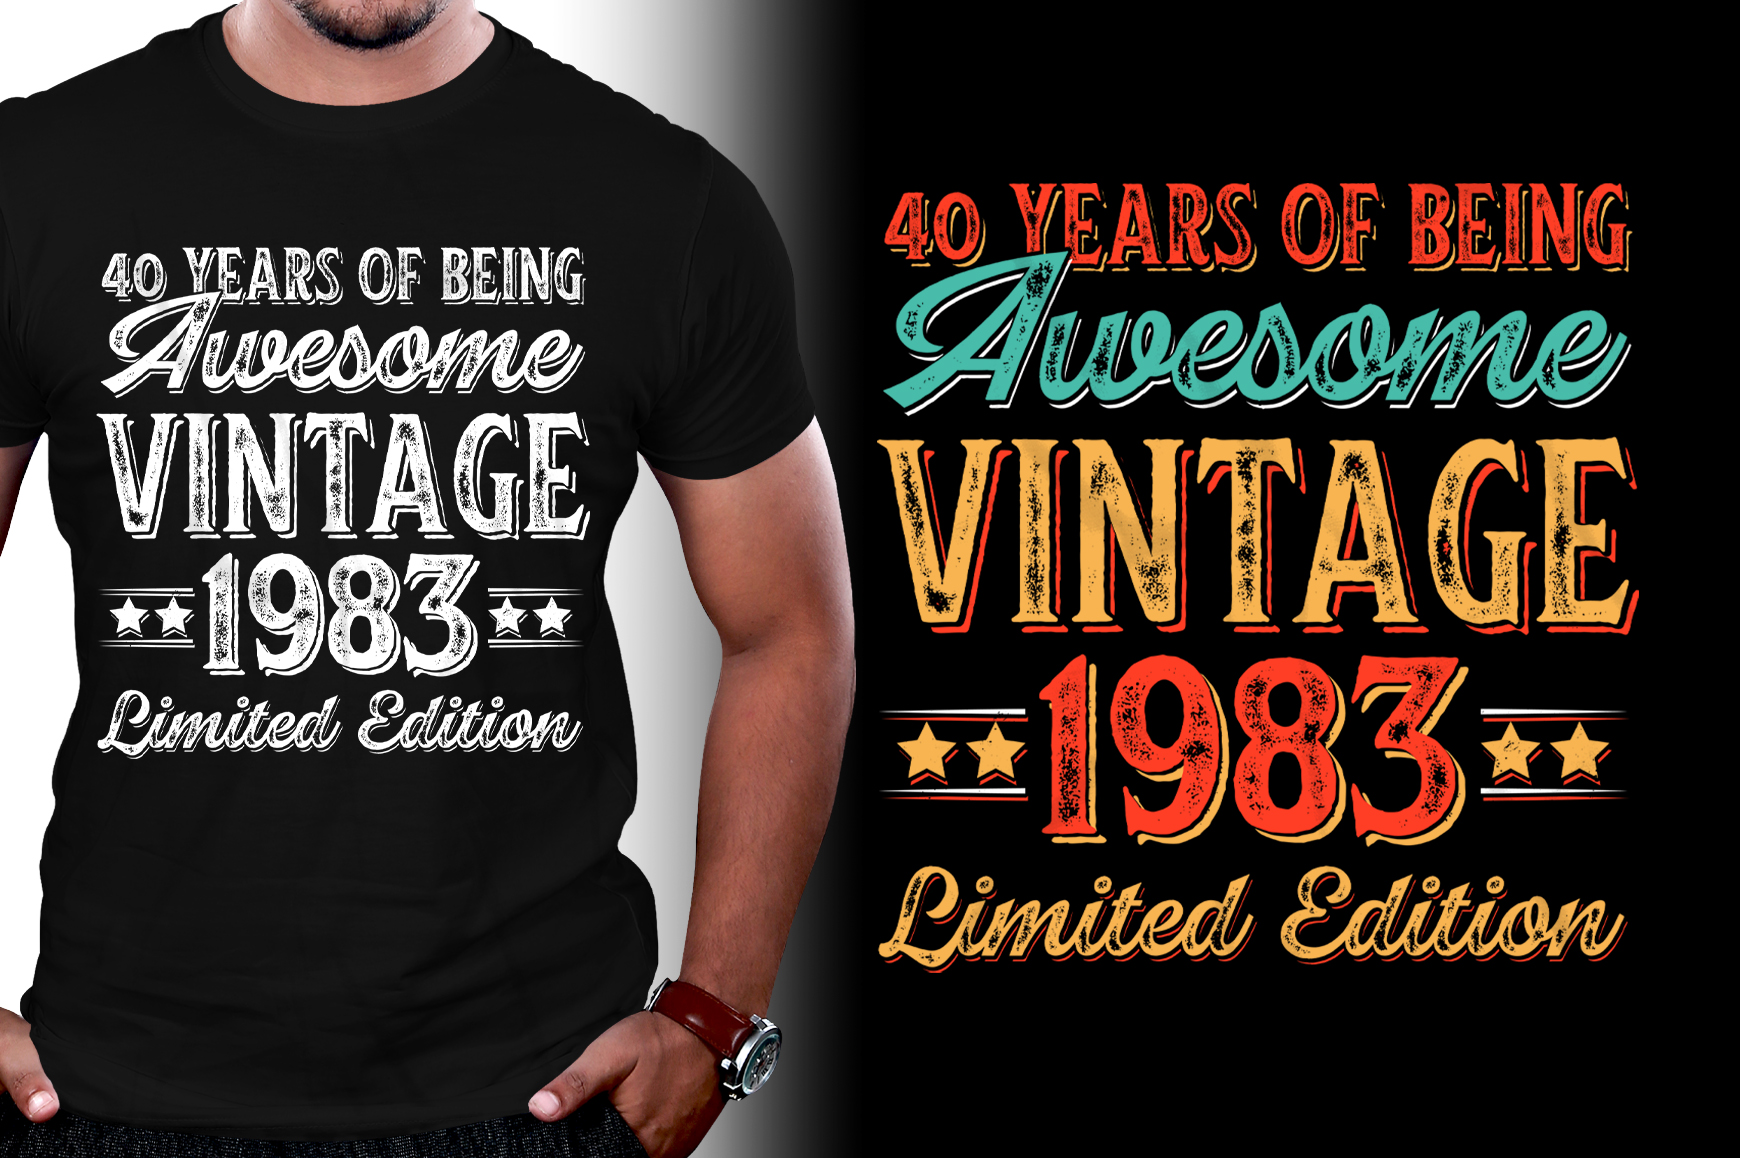 40 Years of Being Awesome 1983 Limited Edition Birthday T-Shirt Design Buy t-shirt